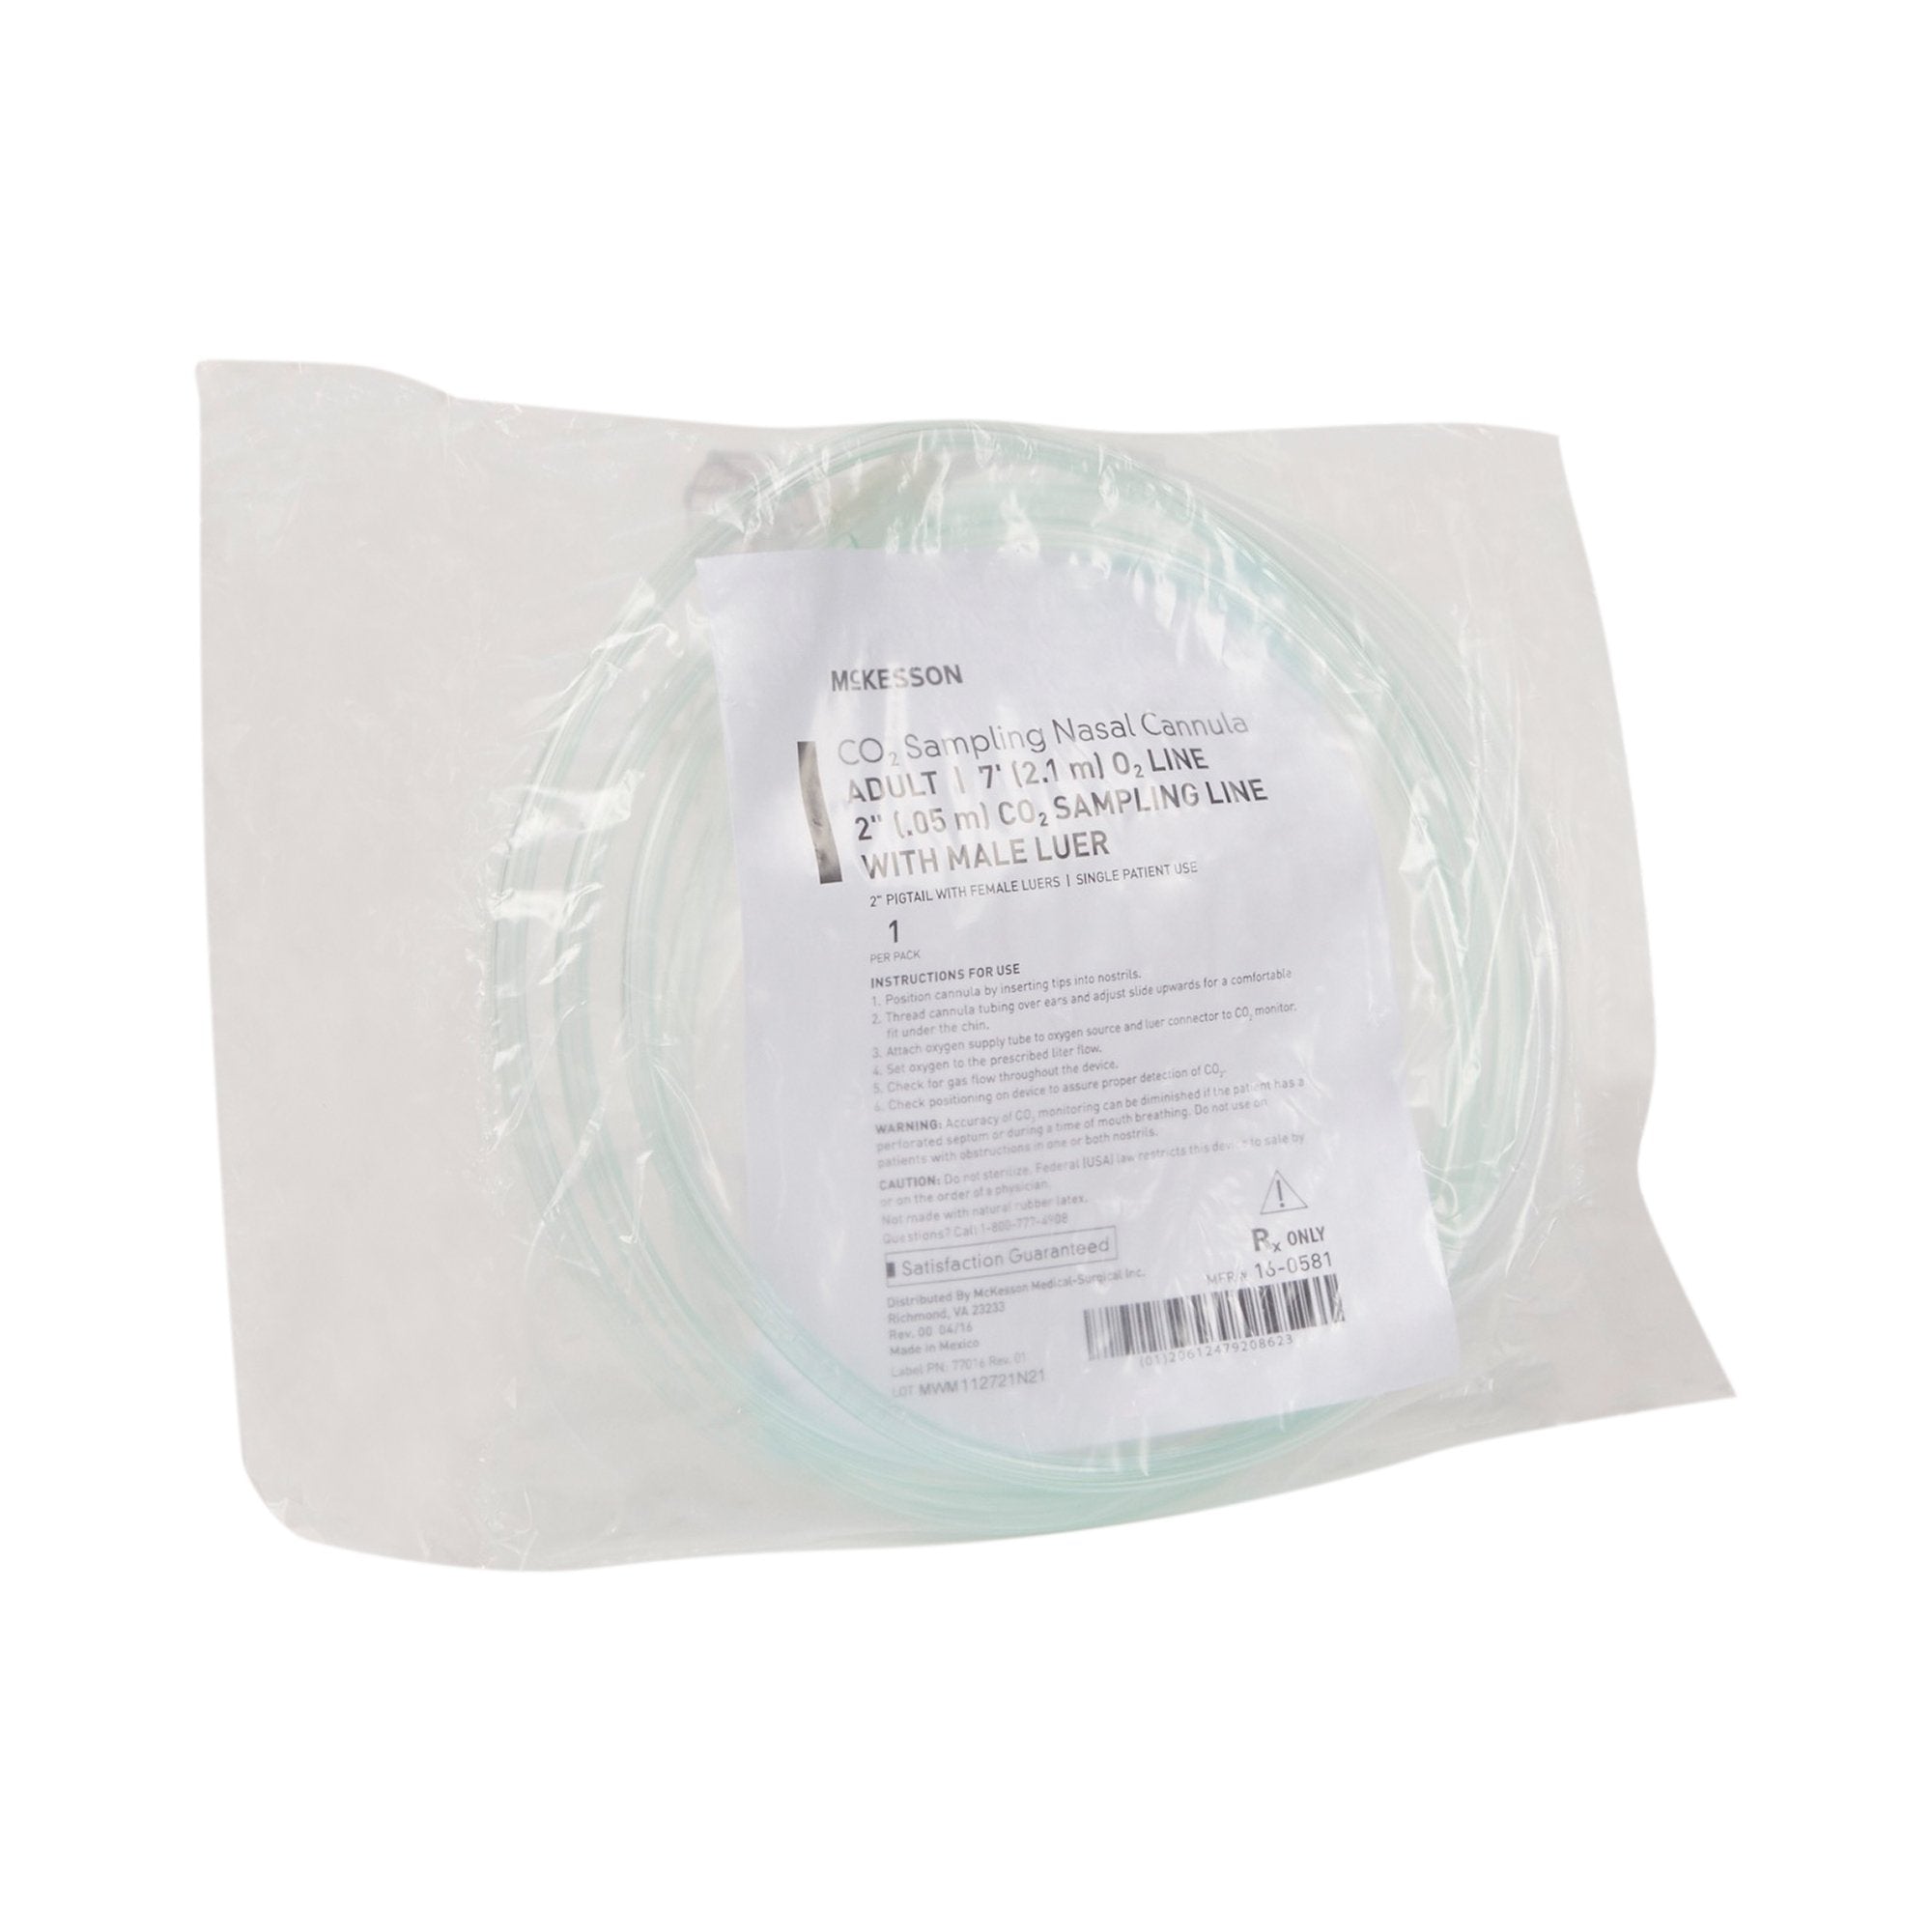 ETCO2 Nasal Sampling Cannula with O2 Delivery With Oxygen Delivery McKesson Adult Curved Prong / NonFlared Tip